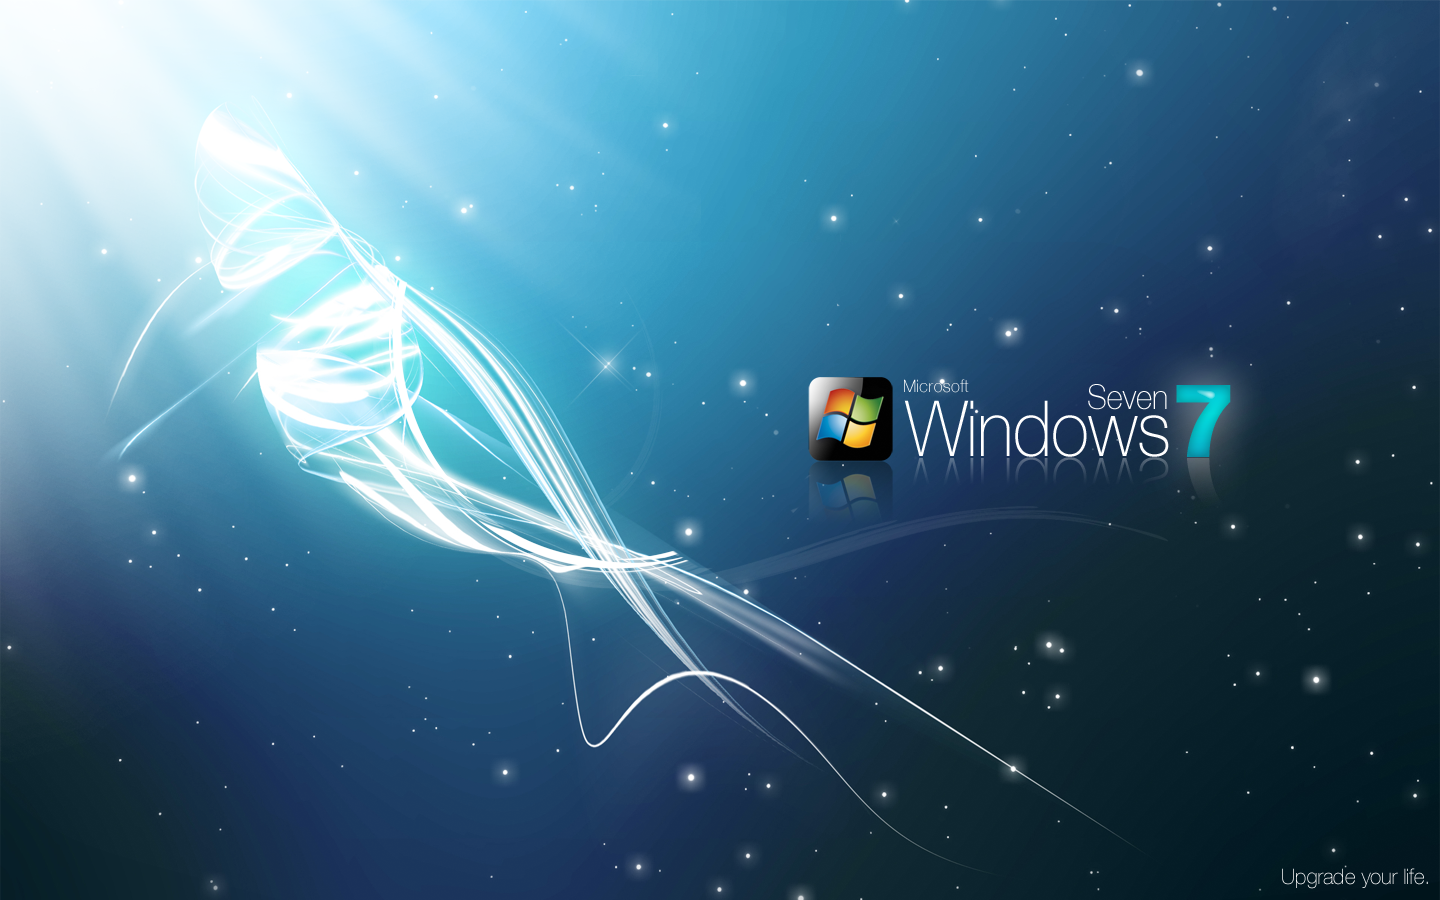 wallpapers: Windows 7 Nature Wallpapers